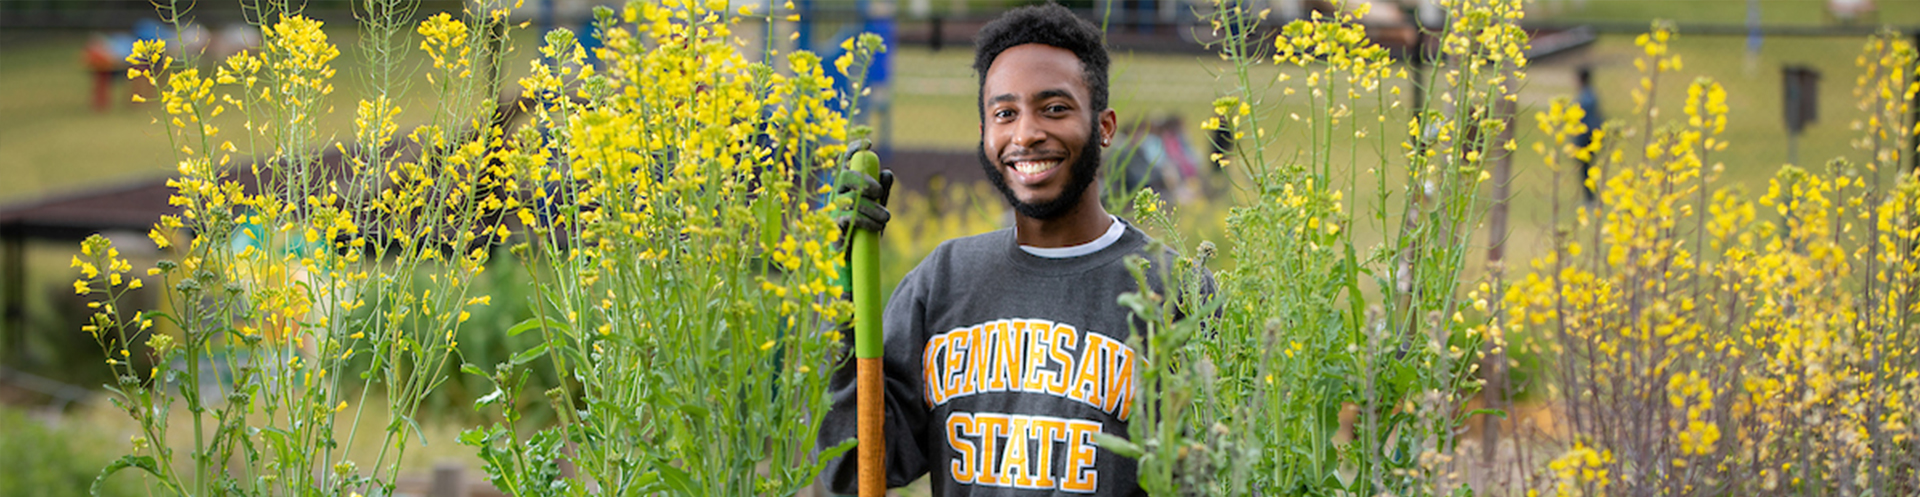 Kennesaw State graduate cultivates awareness of hunger, food insecurity